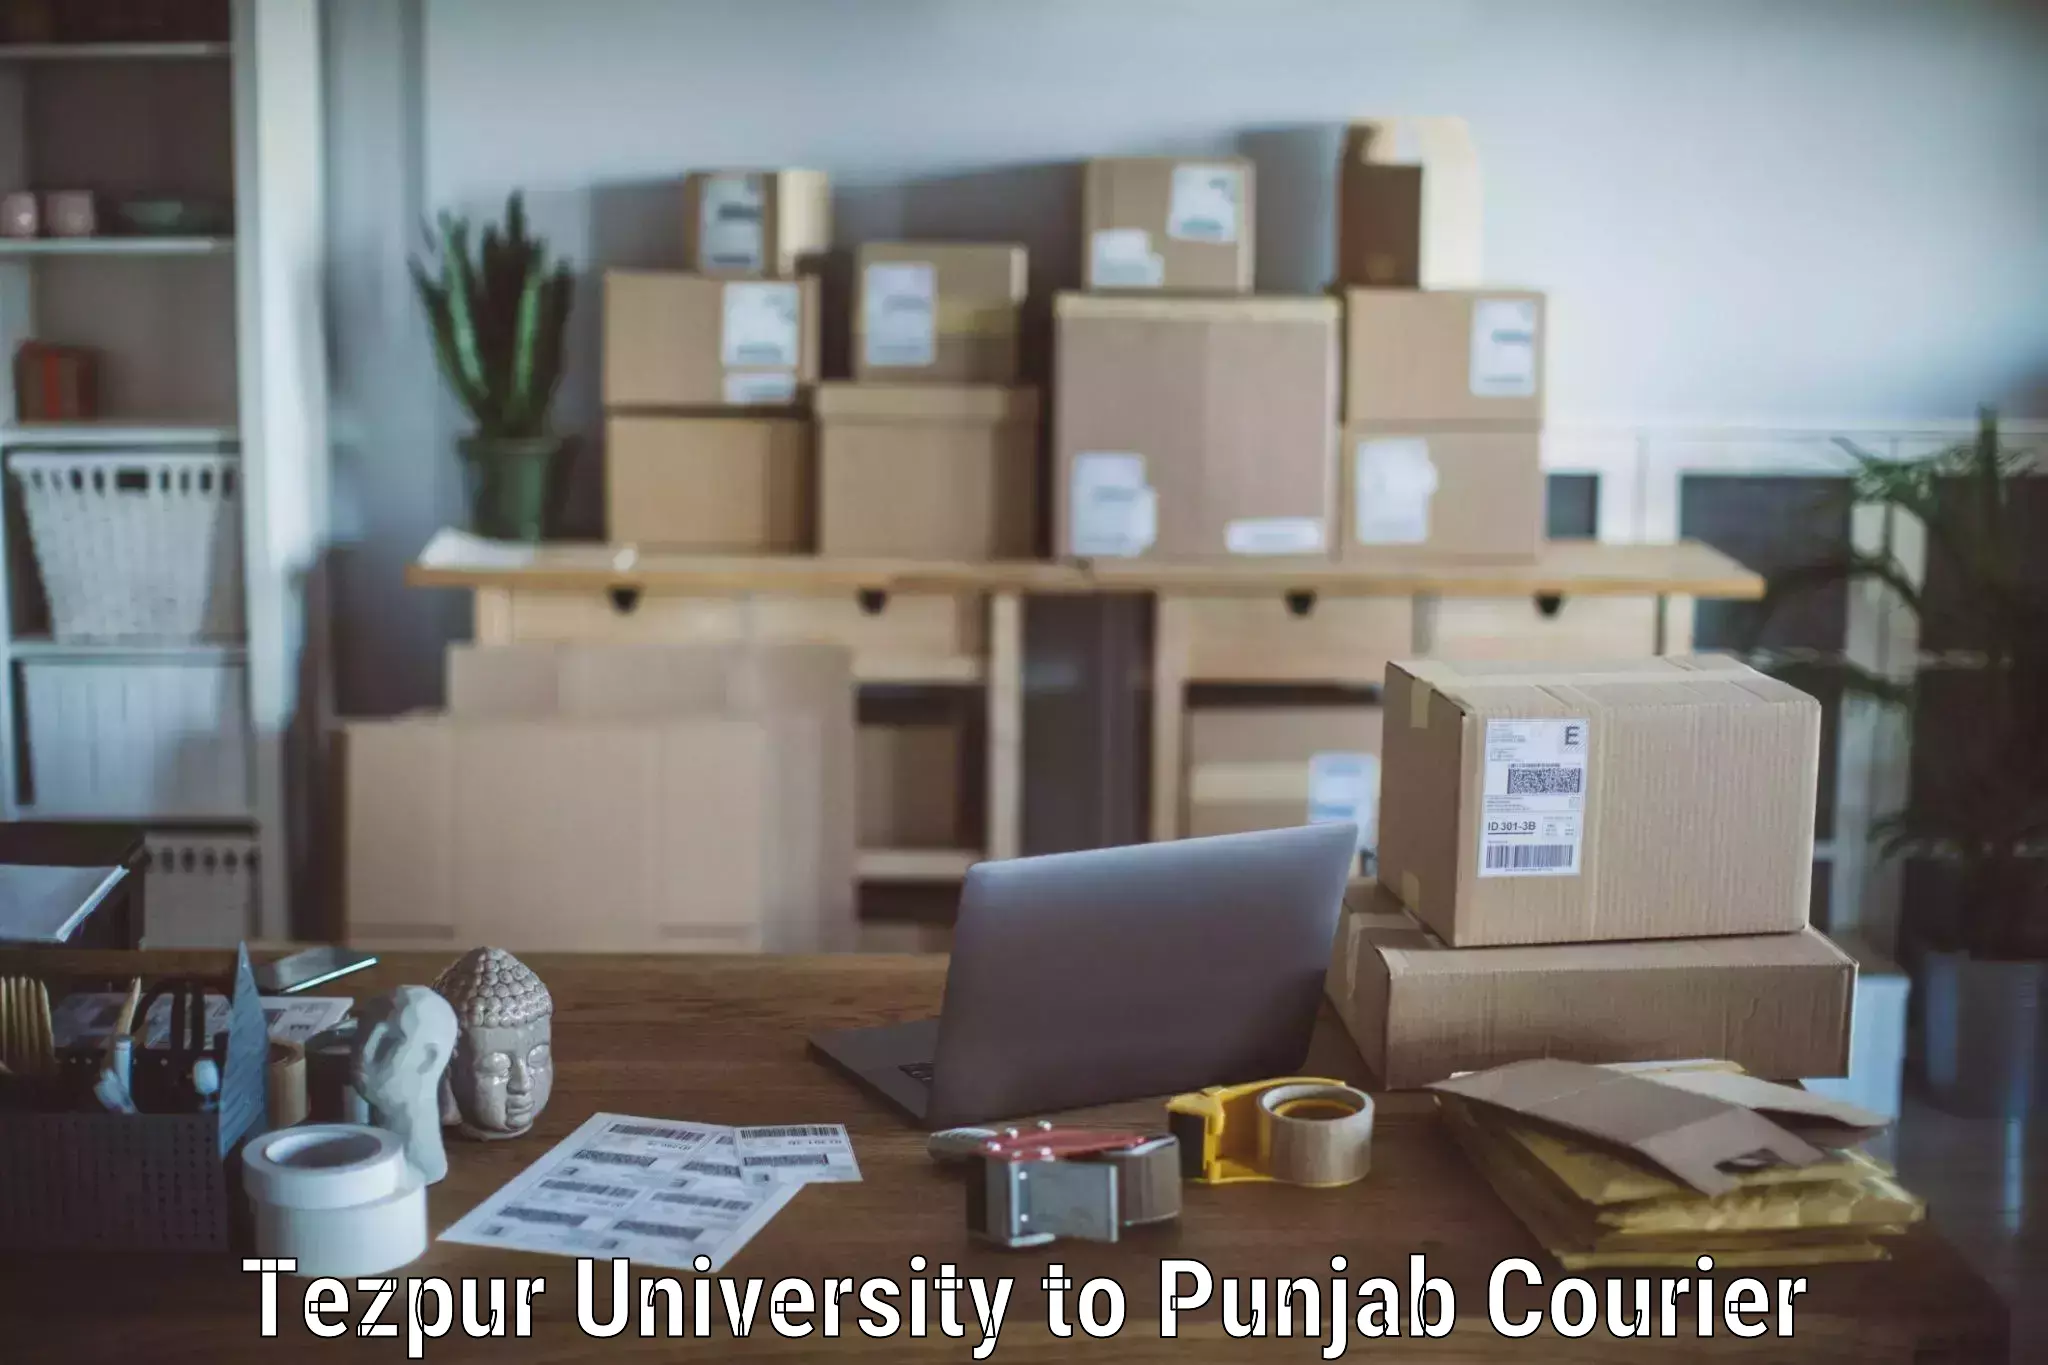 Affordable moving services Tezpur University to Dinanagar